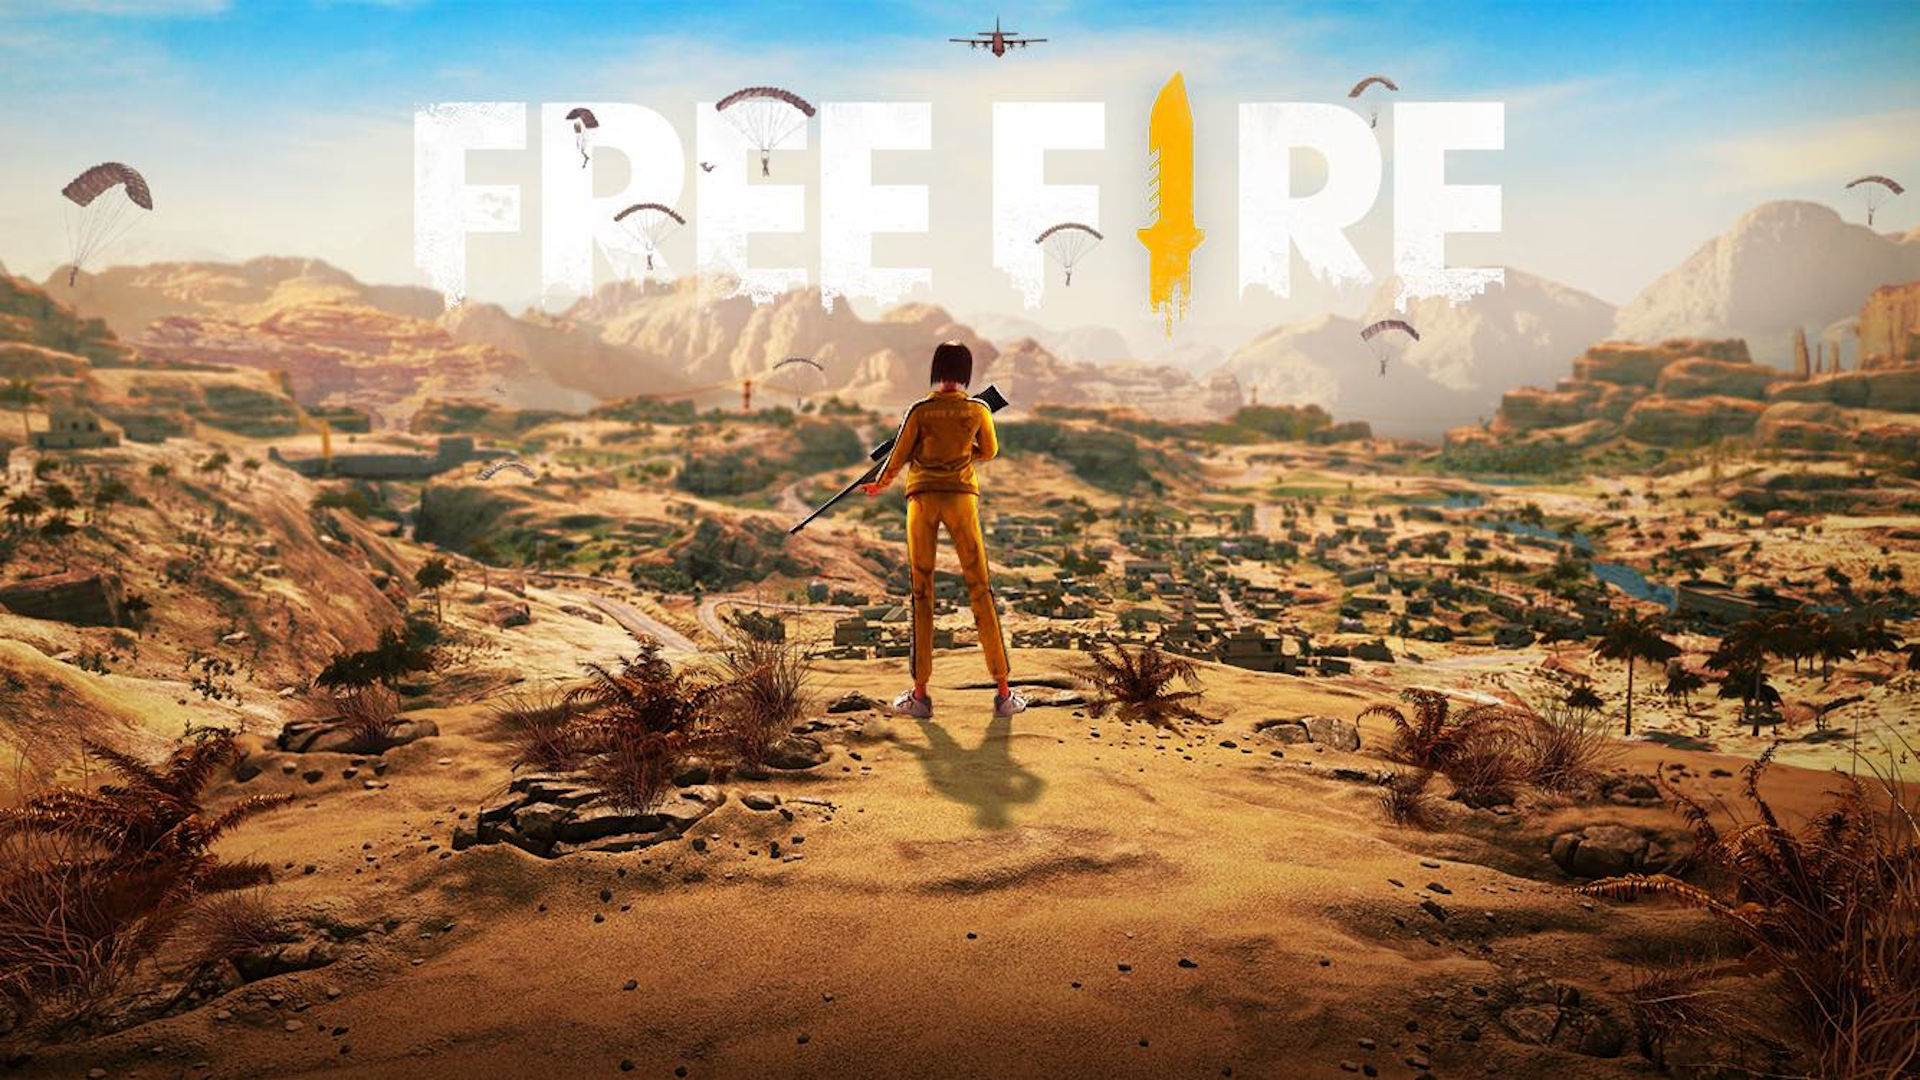 Garena Free Fire: Download and play it on PC